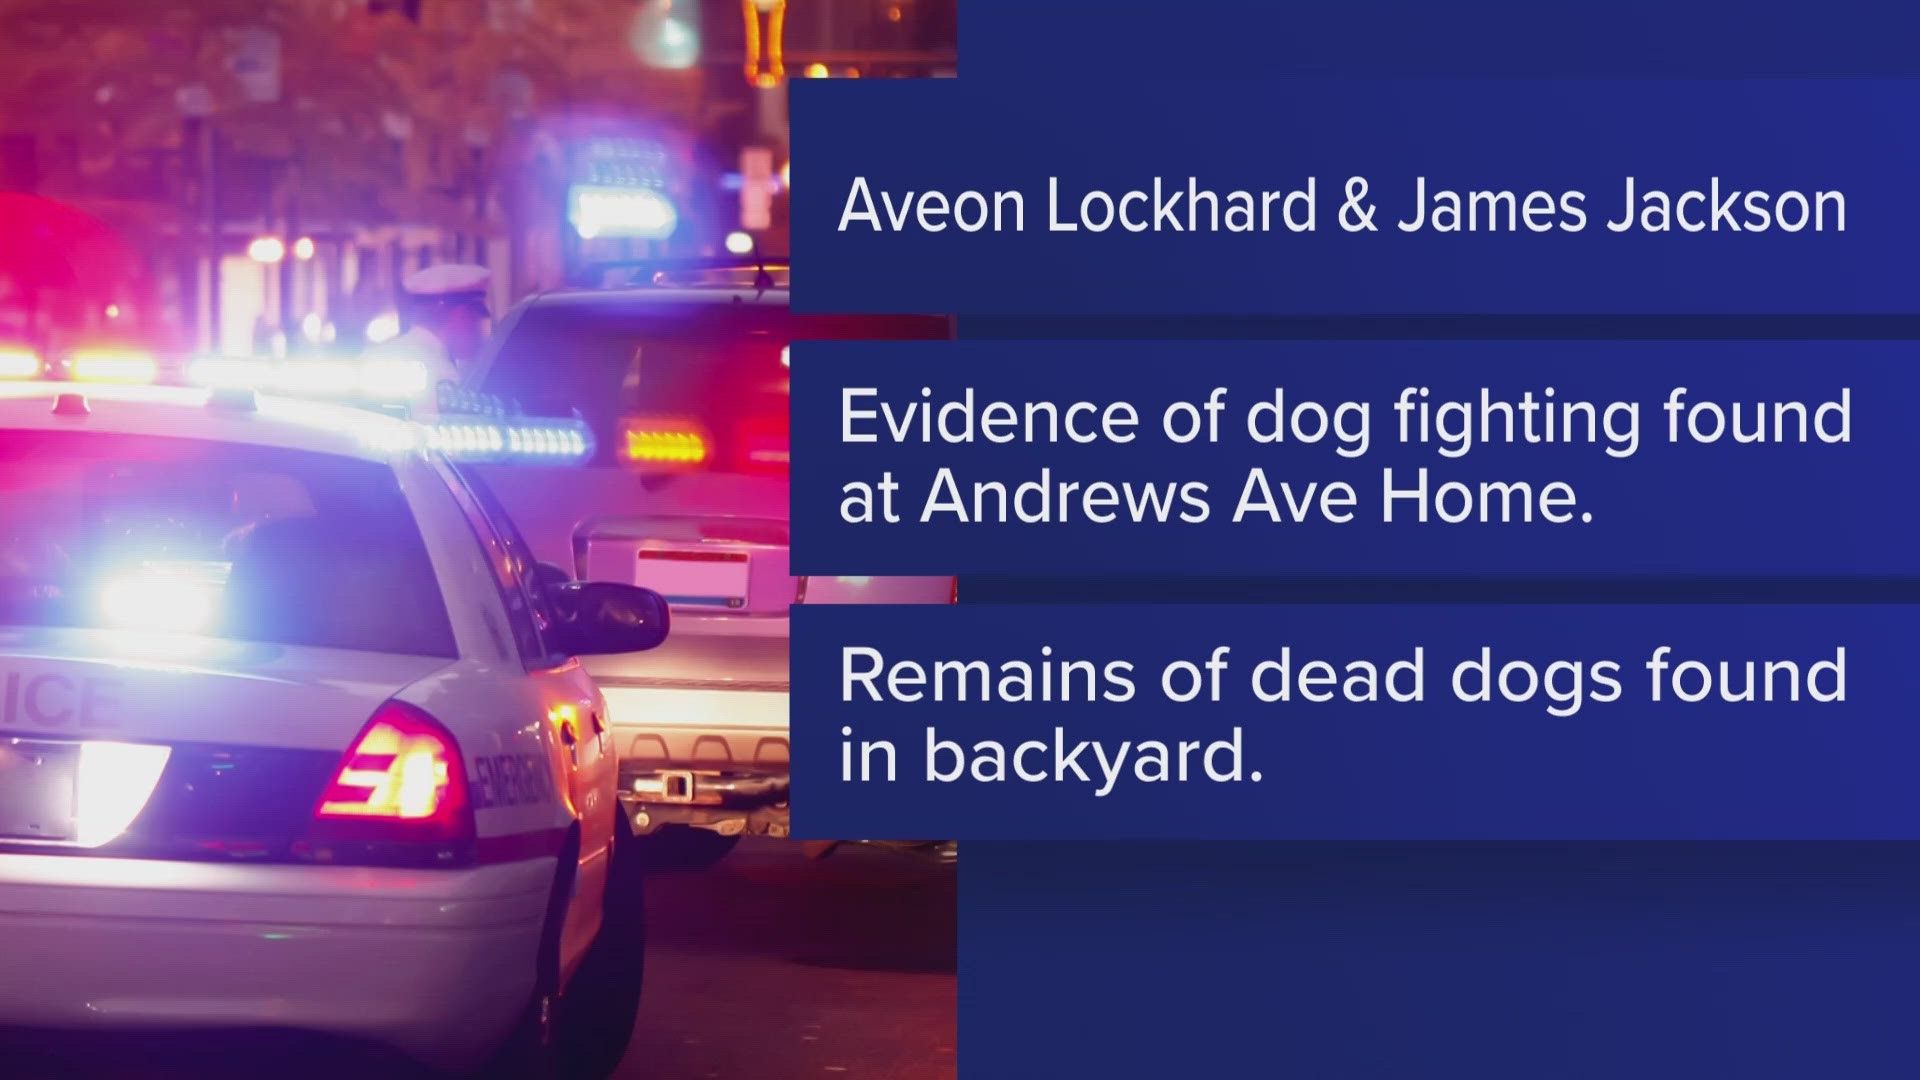 Prosecutors say 23-year-old Aveon Lockhard, and 24-year-old James Jackson are both charged with "Prohibition of Animal Fighting, Overdriving, Torturing, and I